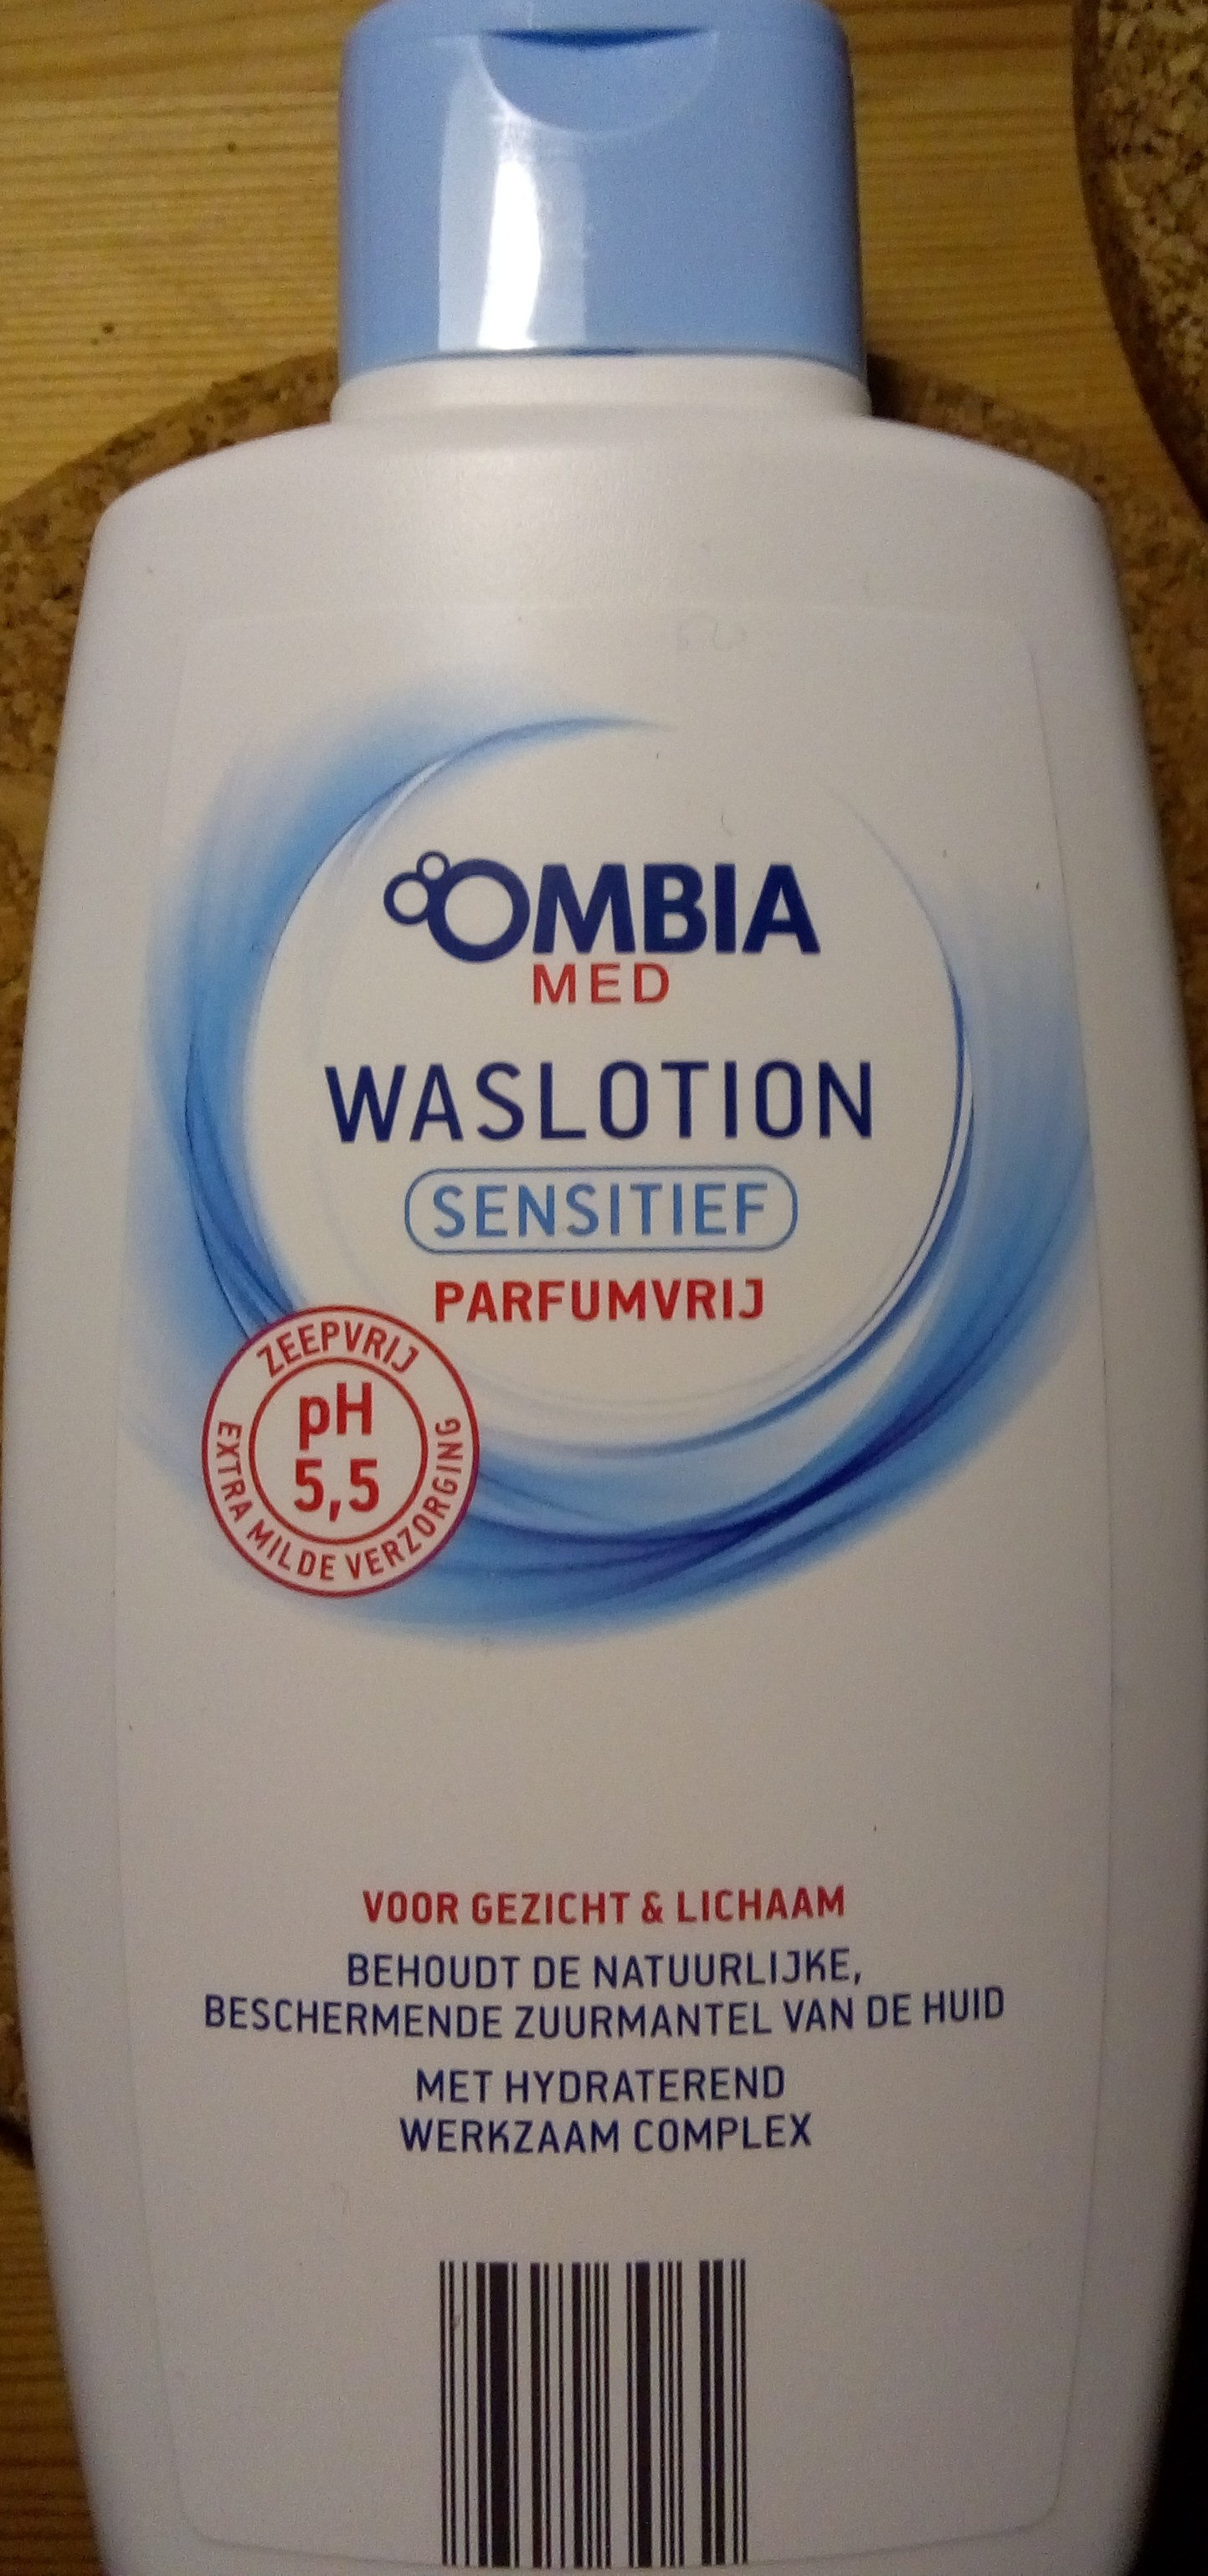 Ombia Med waslotion sensitief - Tuote - nl